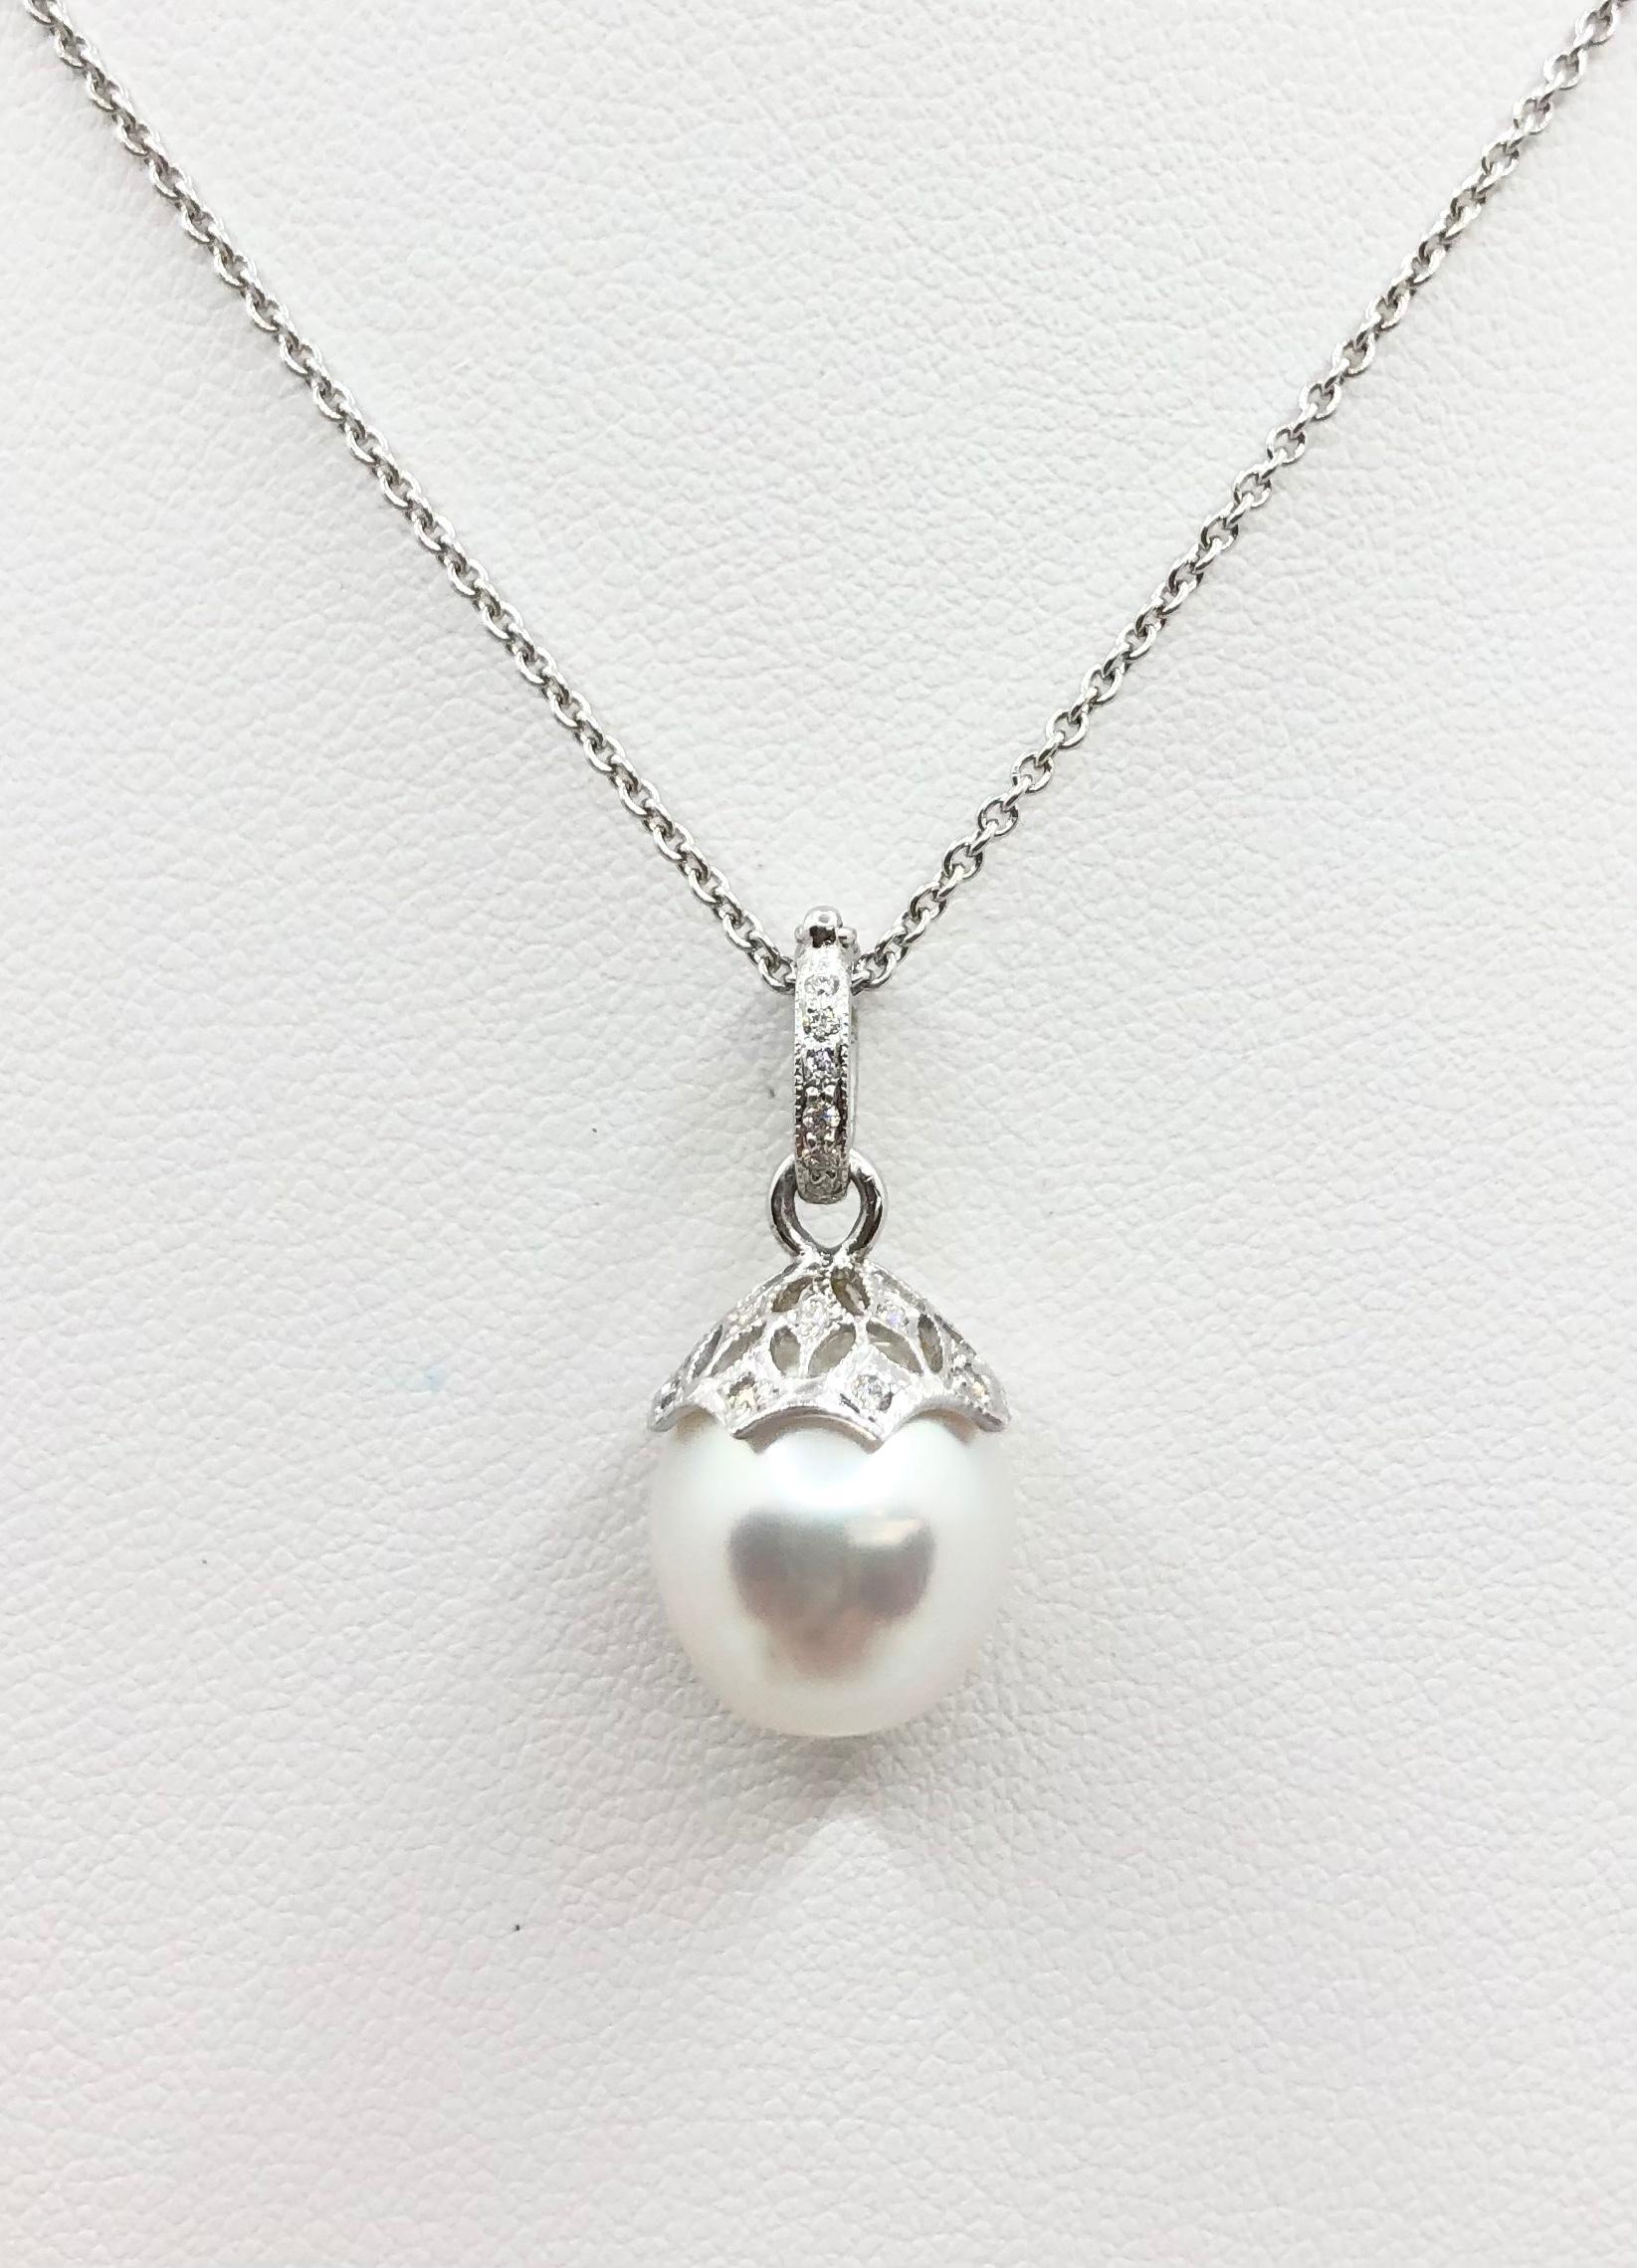 South Sea Pearl with Diamond 0.09 carat Pendant set in 18 Karat White Gold Settings
(chain not included)

Width: 1.1 cm 
Length: 2.2 cm
Total Weight: 3.17 grams
South Sea Pearl: 10.7 mm

